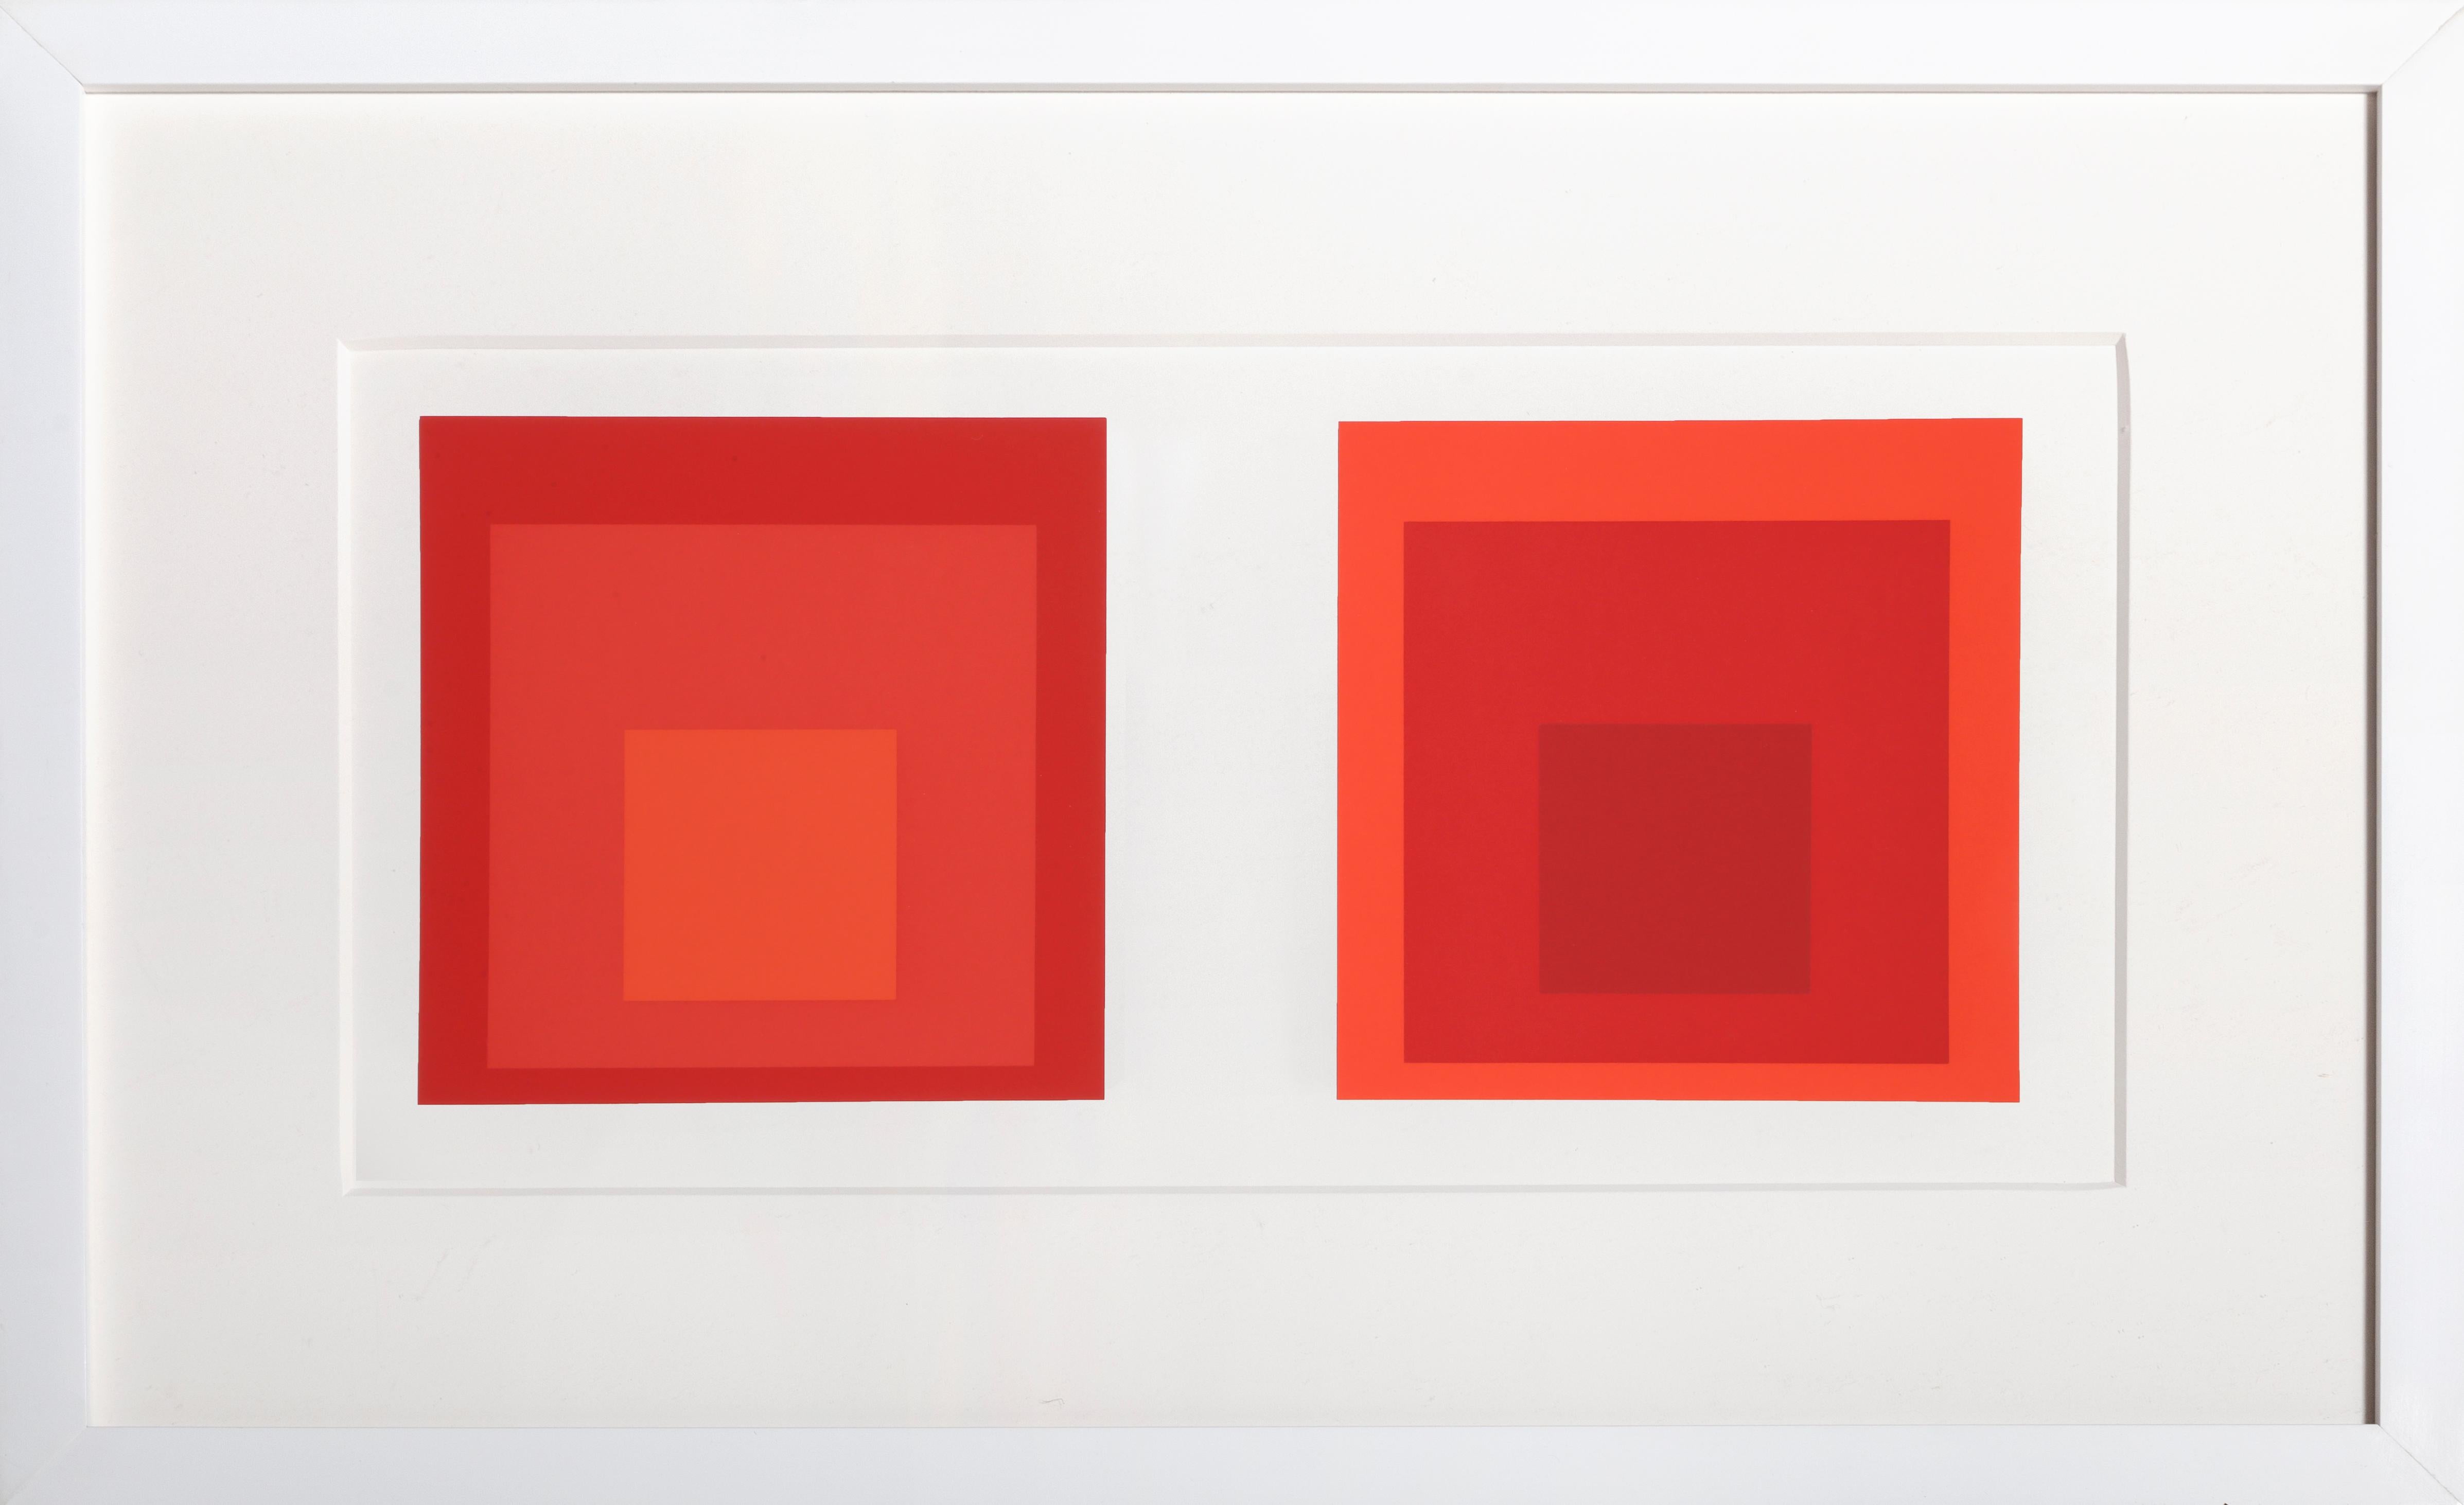 Josef Albers Abstract Print - Homage to the Square - P2, F27, I2